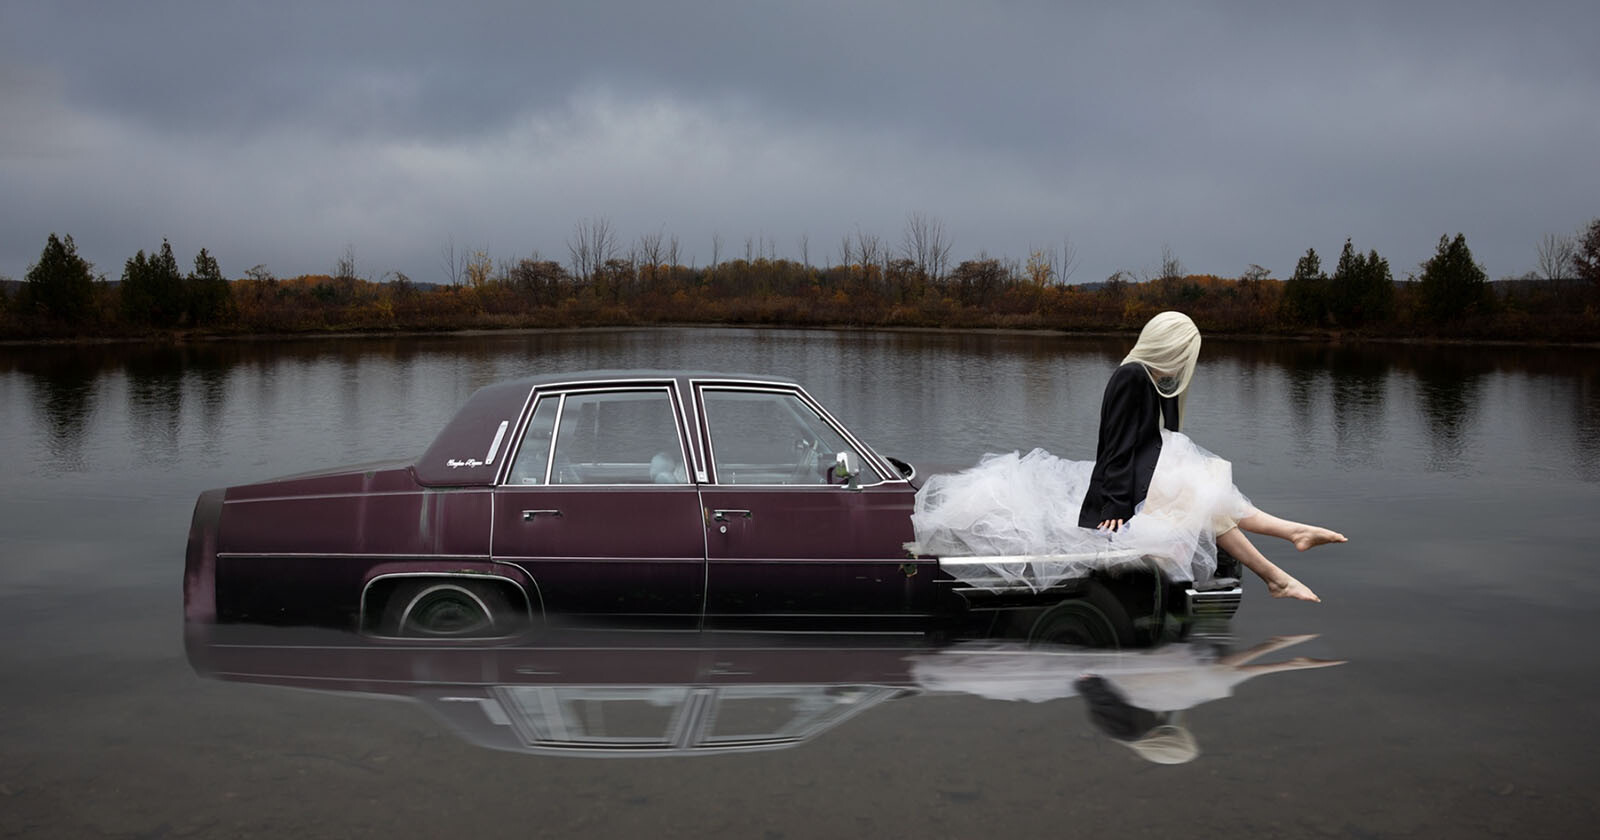  salvage mission photo series gives old cars 